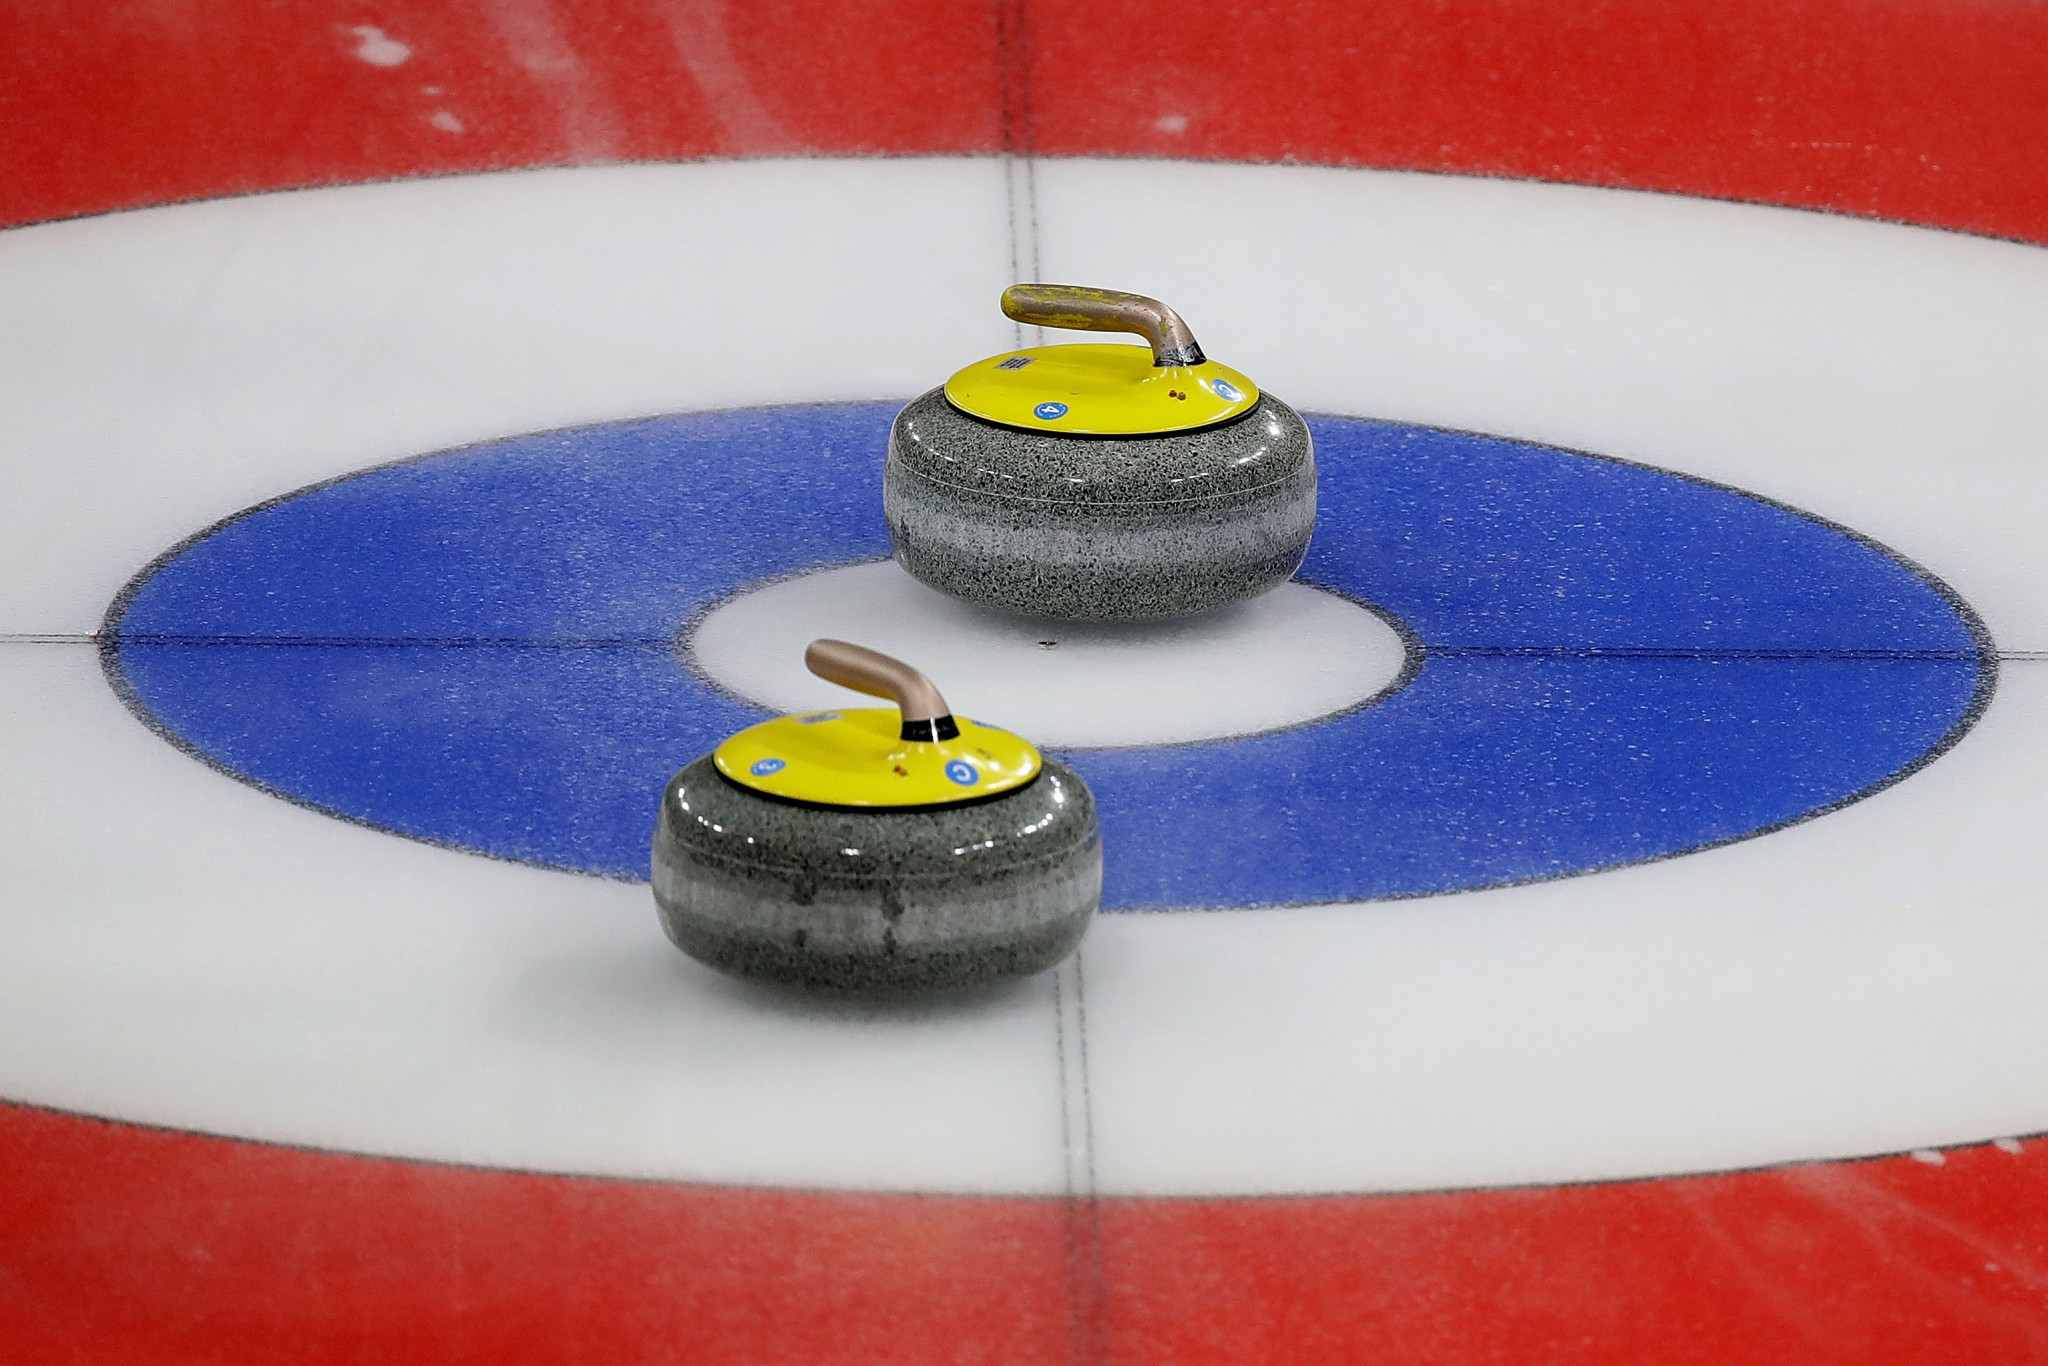 USA Curling extend partnership with live streaming company 12th End Sports Network